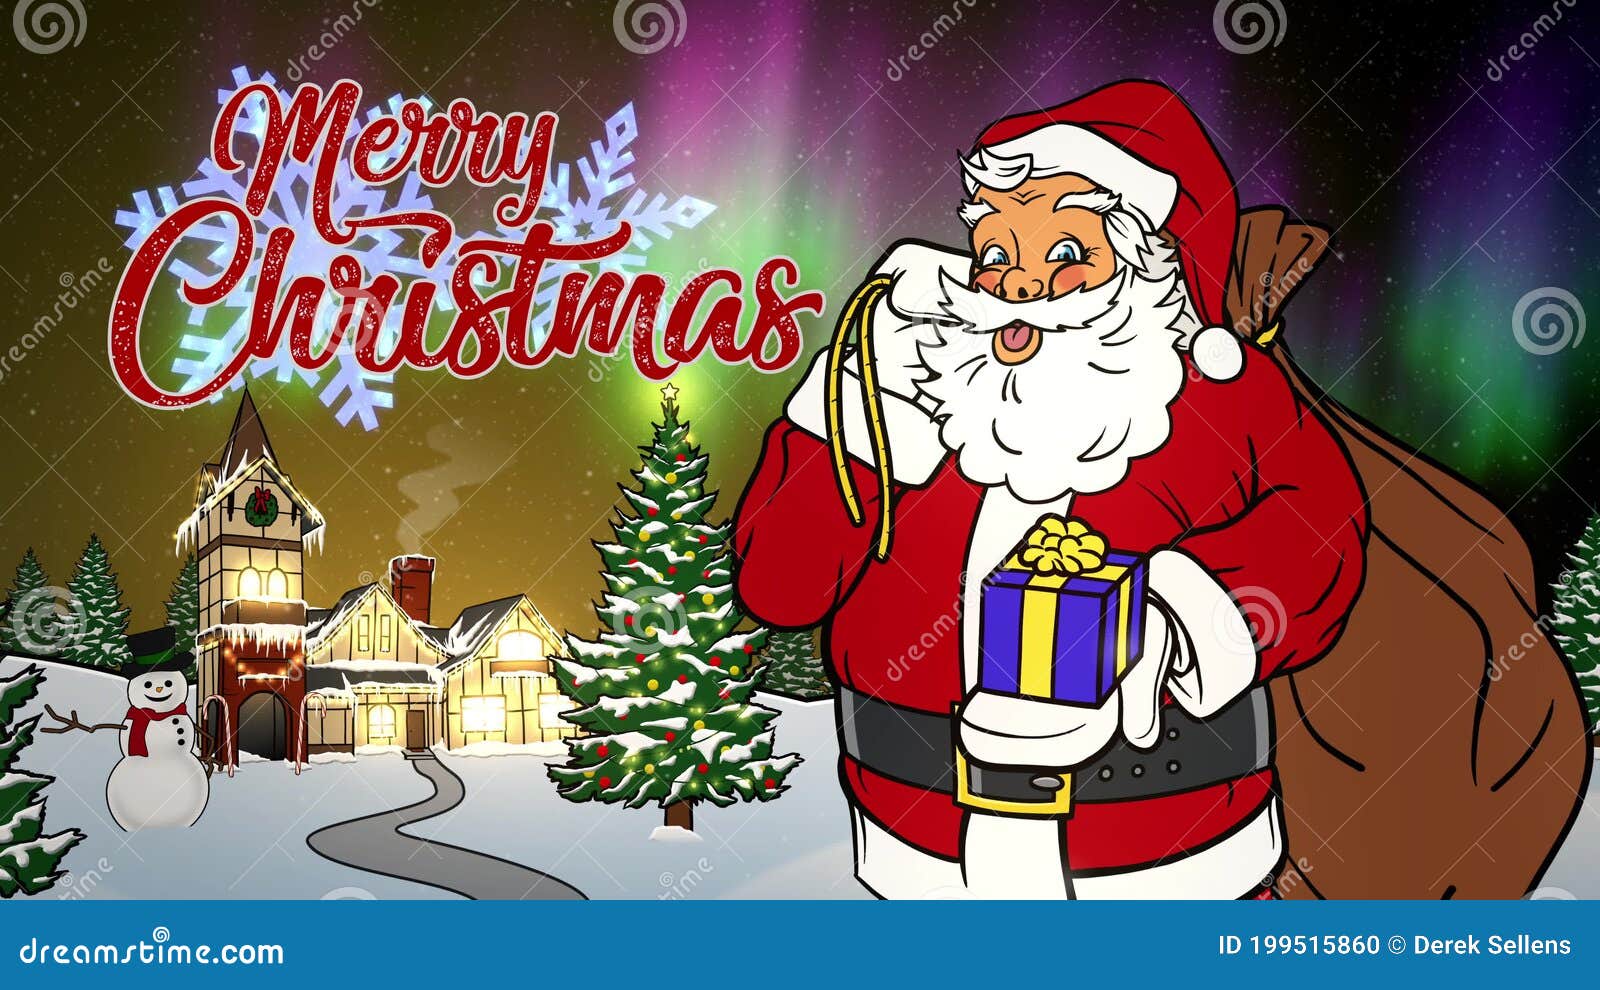 Merry Christmas Animated Card with Santa Close Up at North Pole at Night  Stock Footage - Video of xmas, card: 199515860